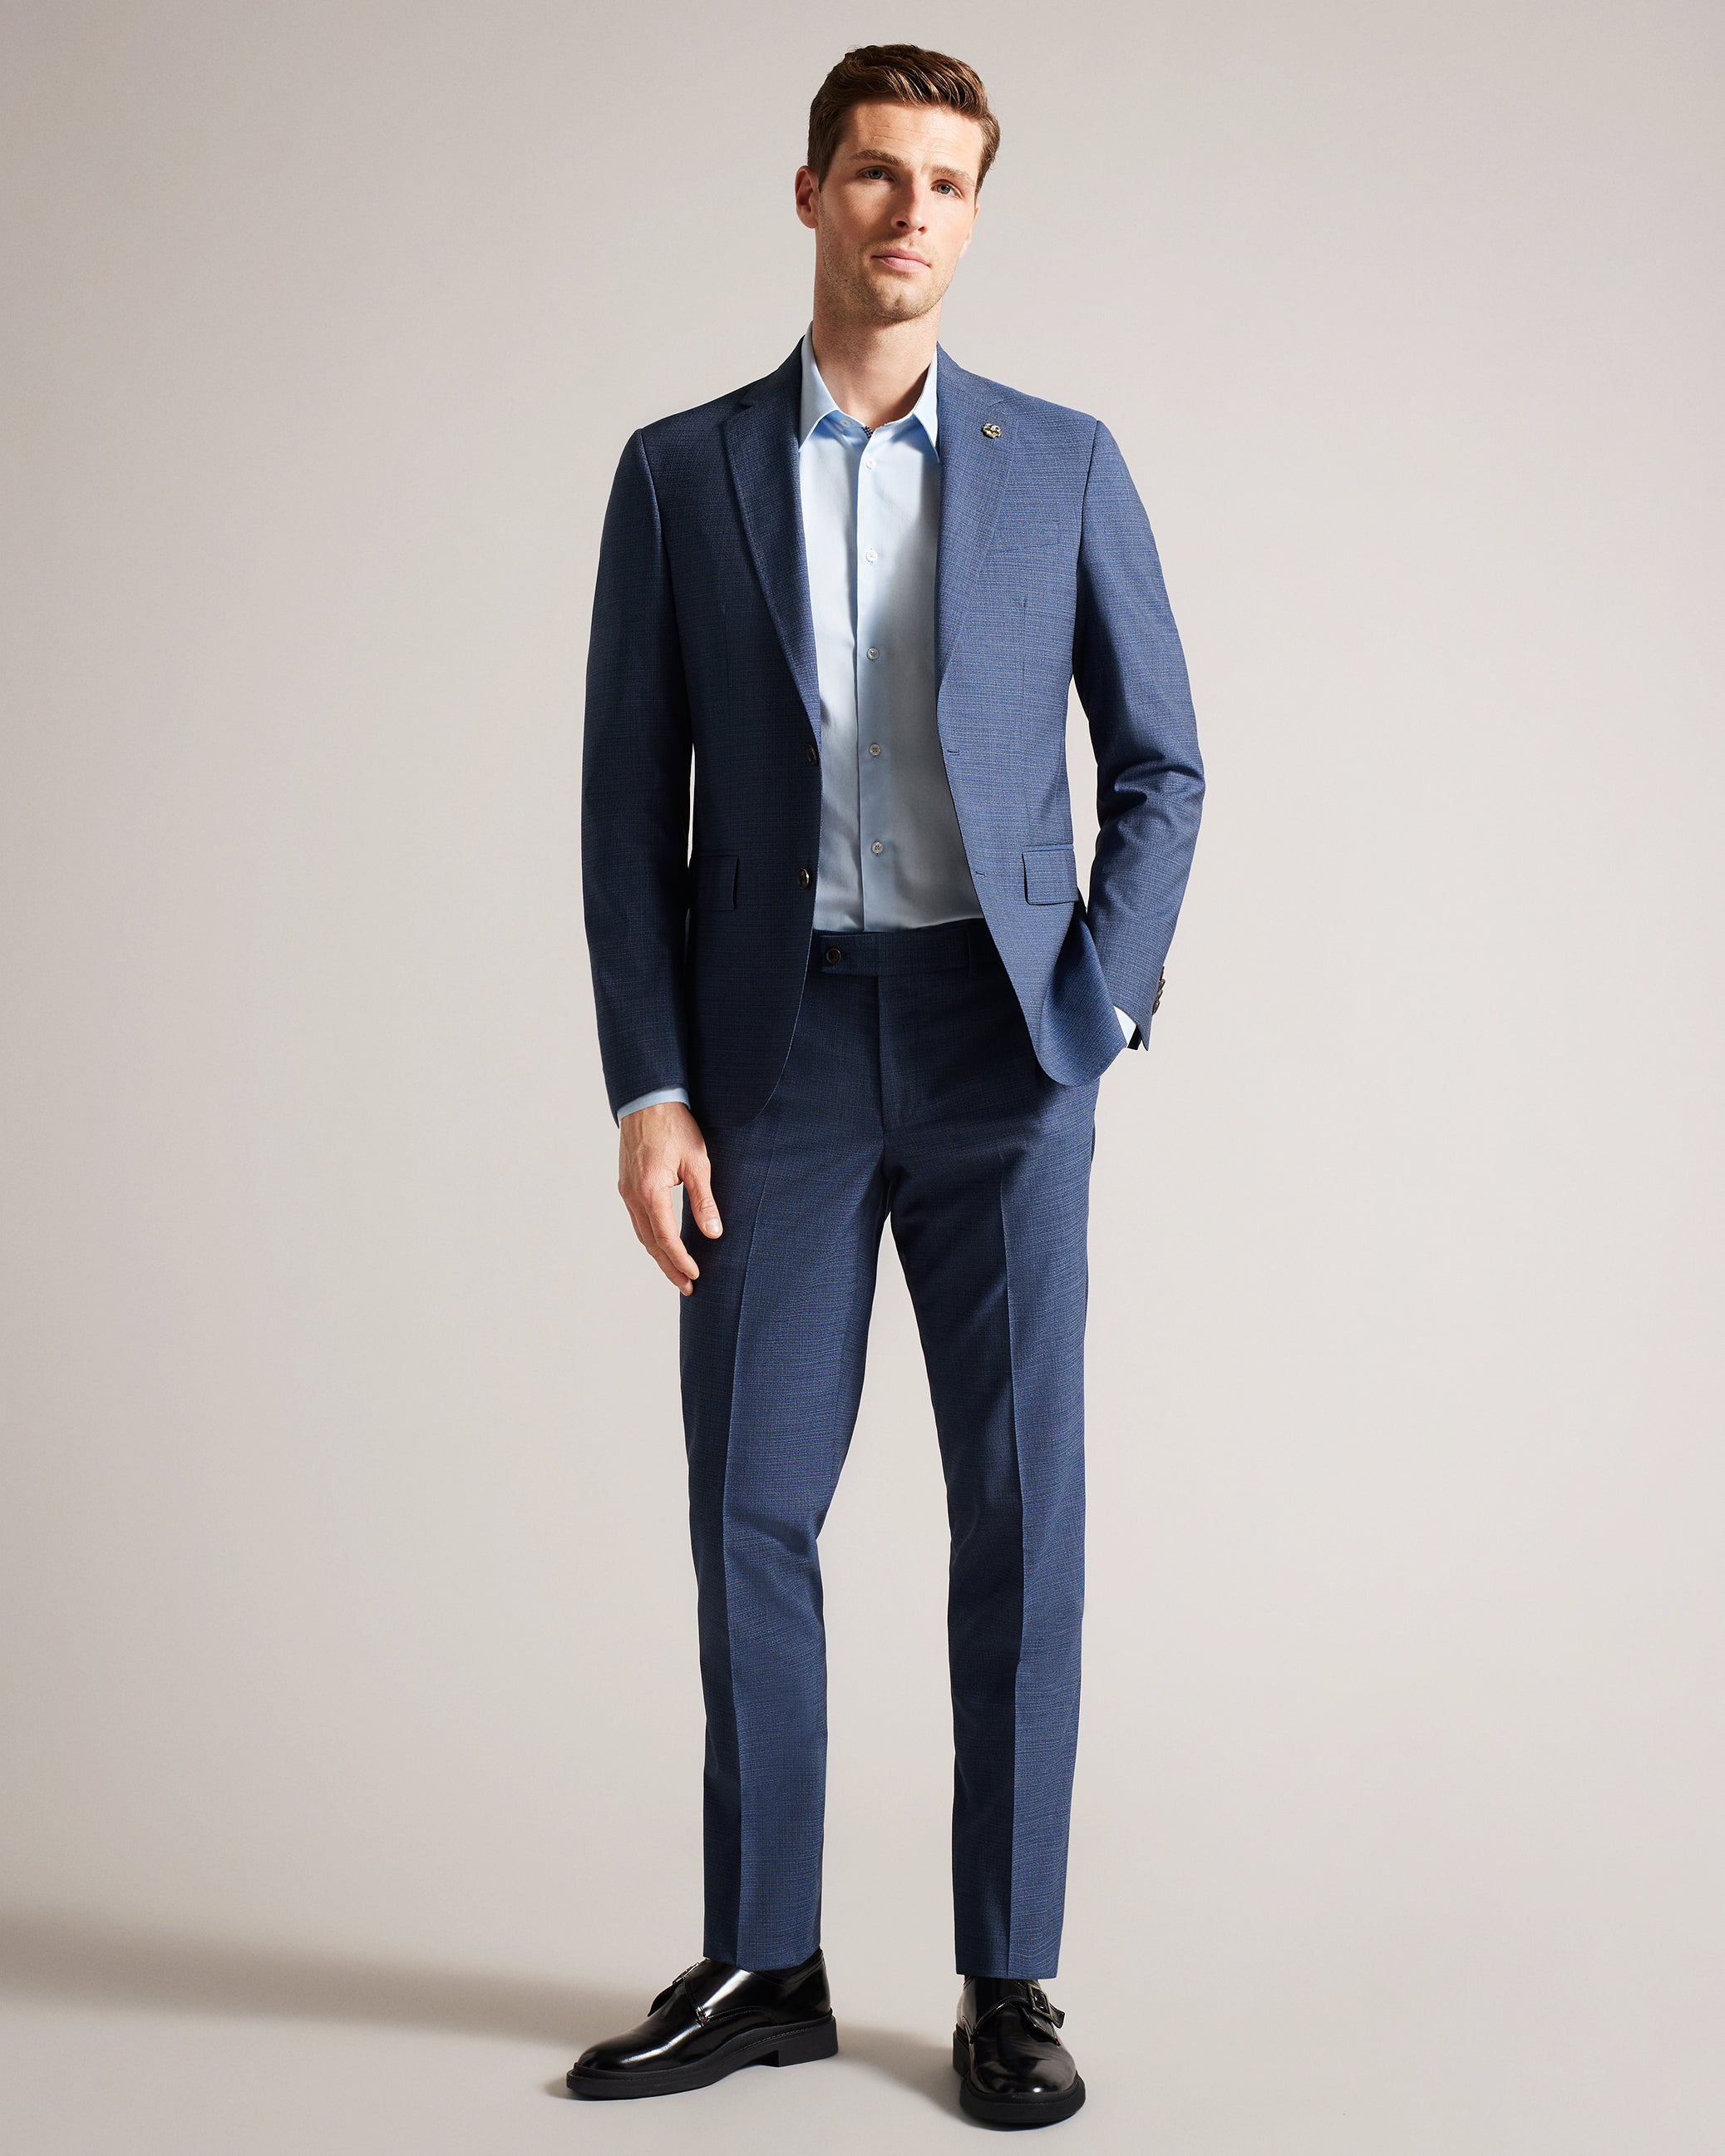 Men's Landing Page – Ted Baker, Canada